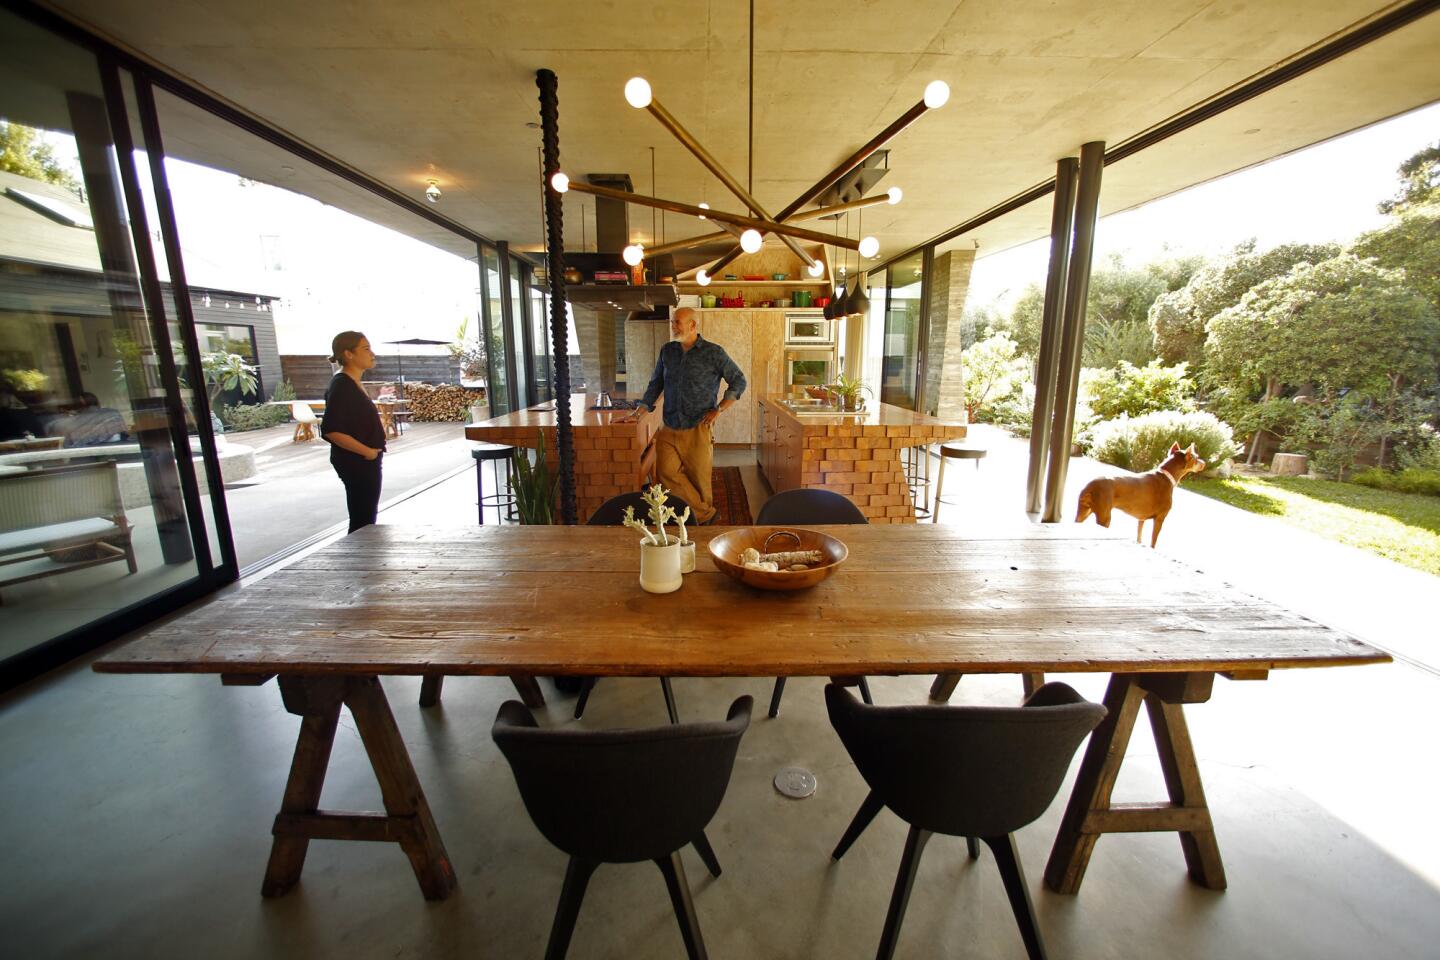 A Venice bungalow is reborn as a family compound